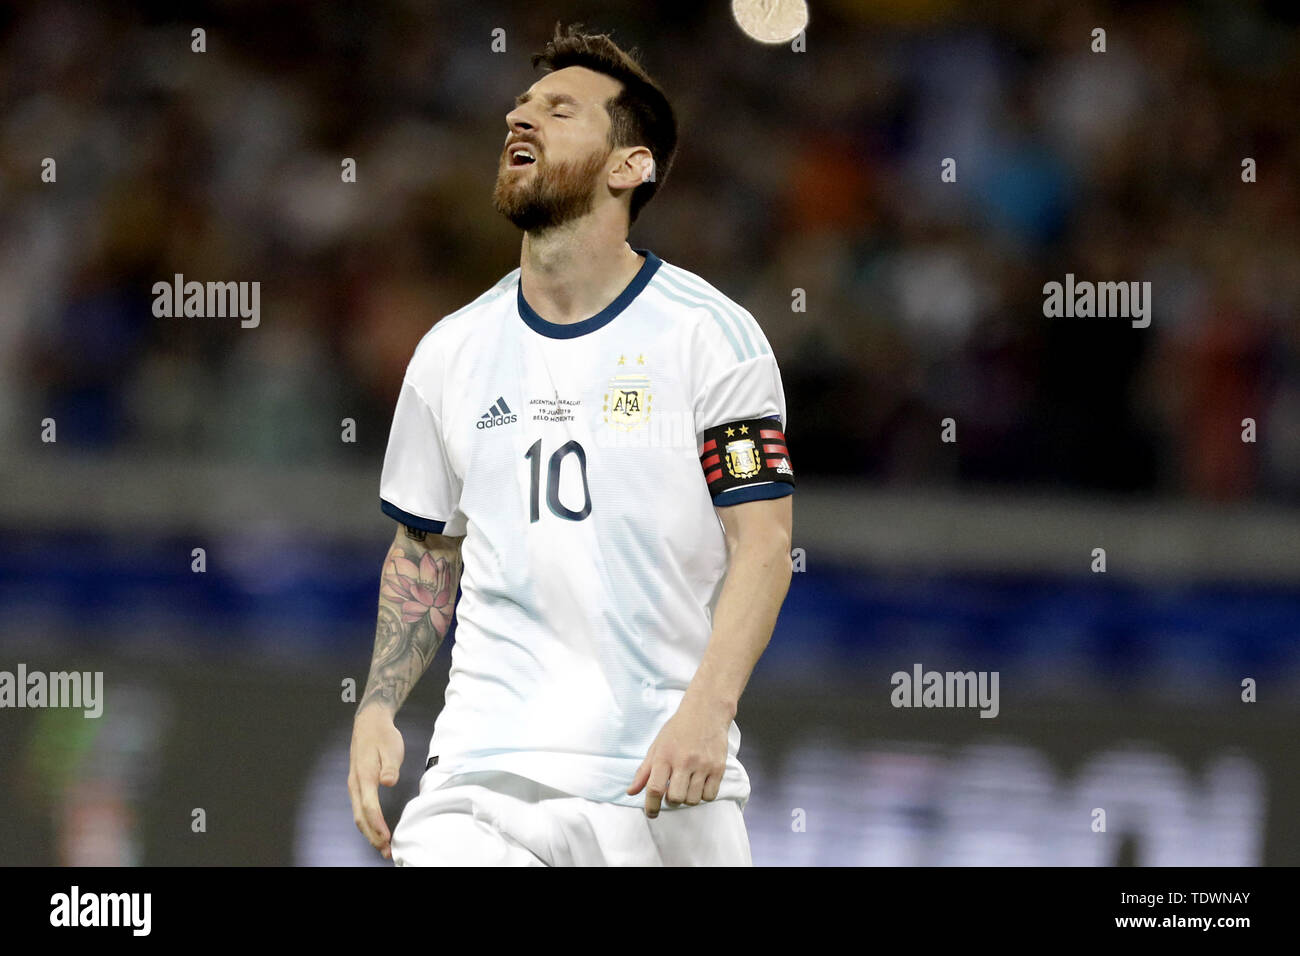 Belo Horizonte, Brazil. 19th June, 2019. Lionel Messi of Argentina reacts during the Copa America 2019 soccer match between Argentina and Paraguay at Mineirao Stadium in Belo Horizonte, Brazil, June 19, 2019. Credit: Lucio Tavora/Xinhua/Alamy Live News Stock Photo